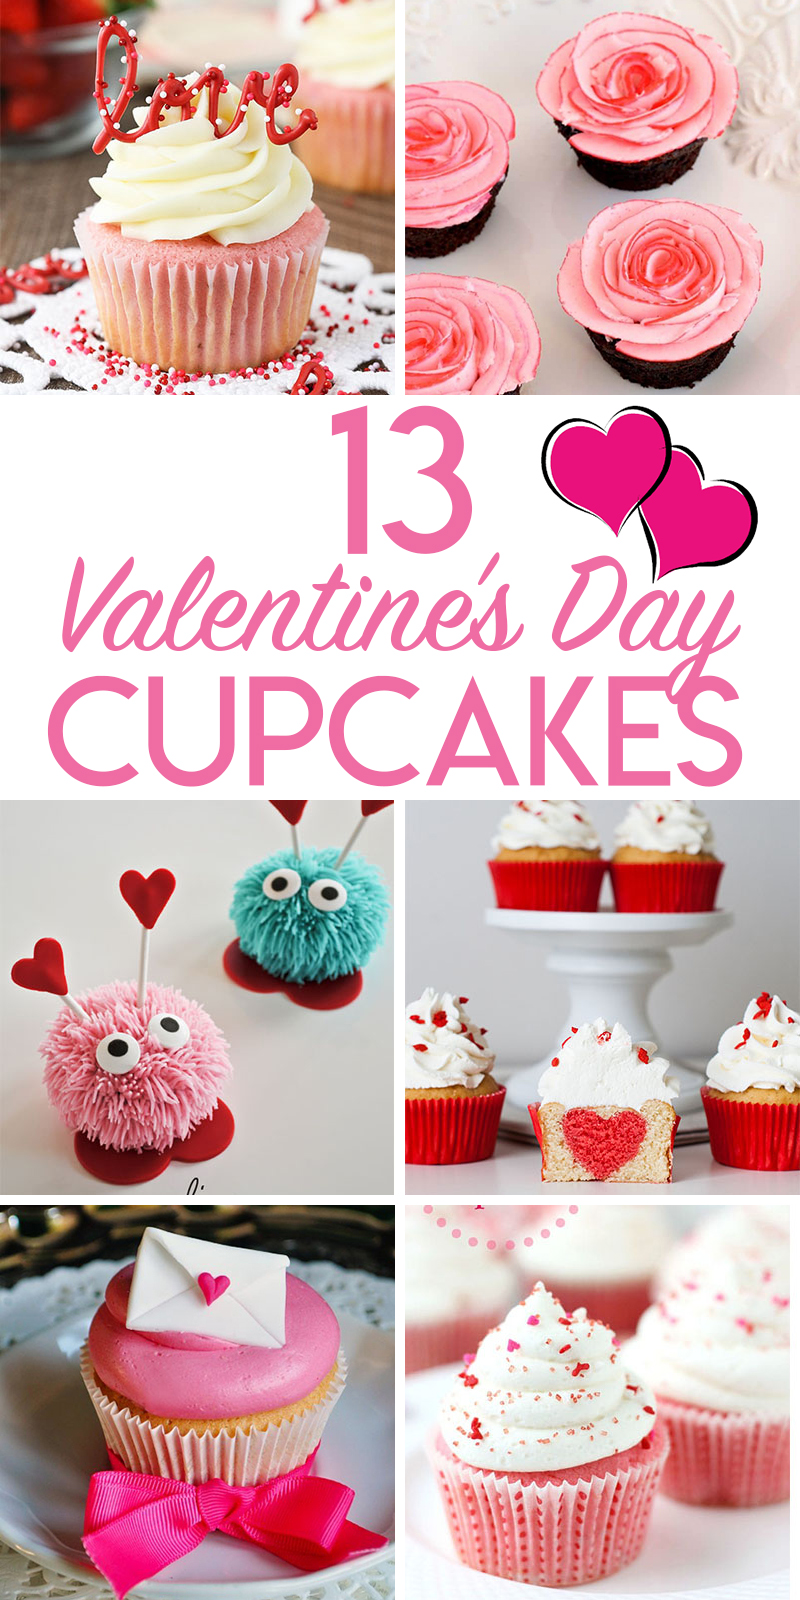 13 Lovely Valentine’s Day Cupcakes | Random Acts of Baking